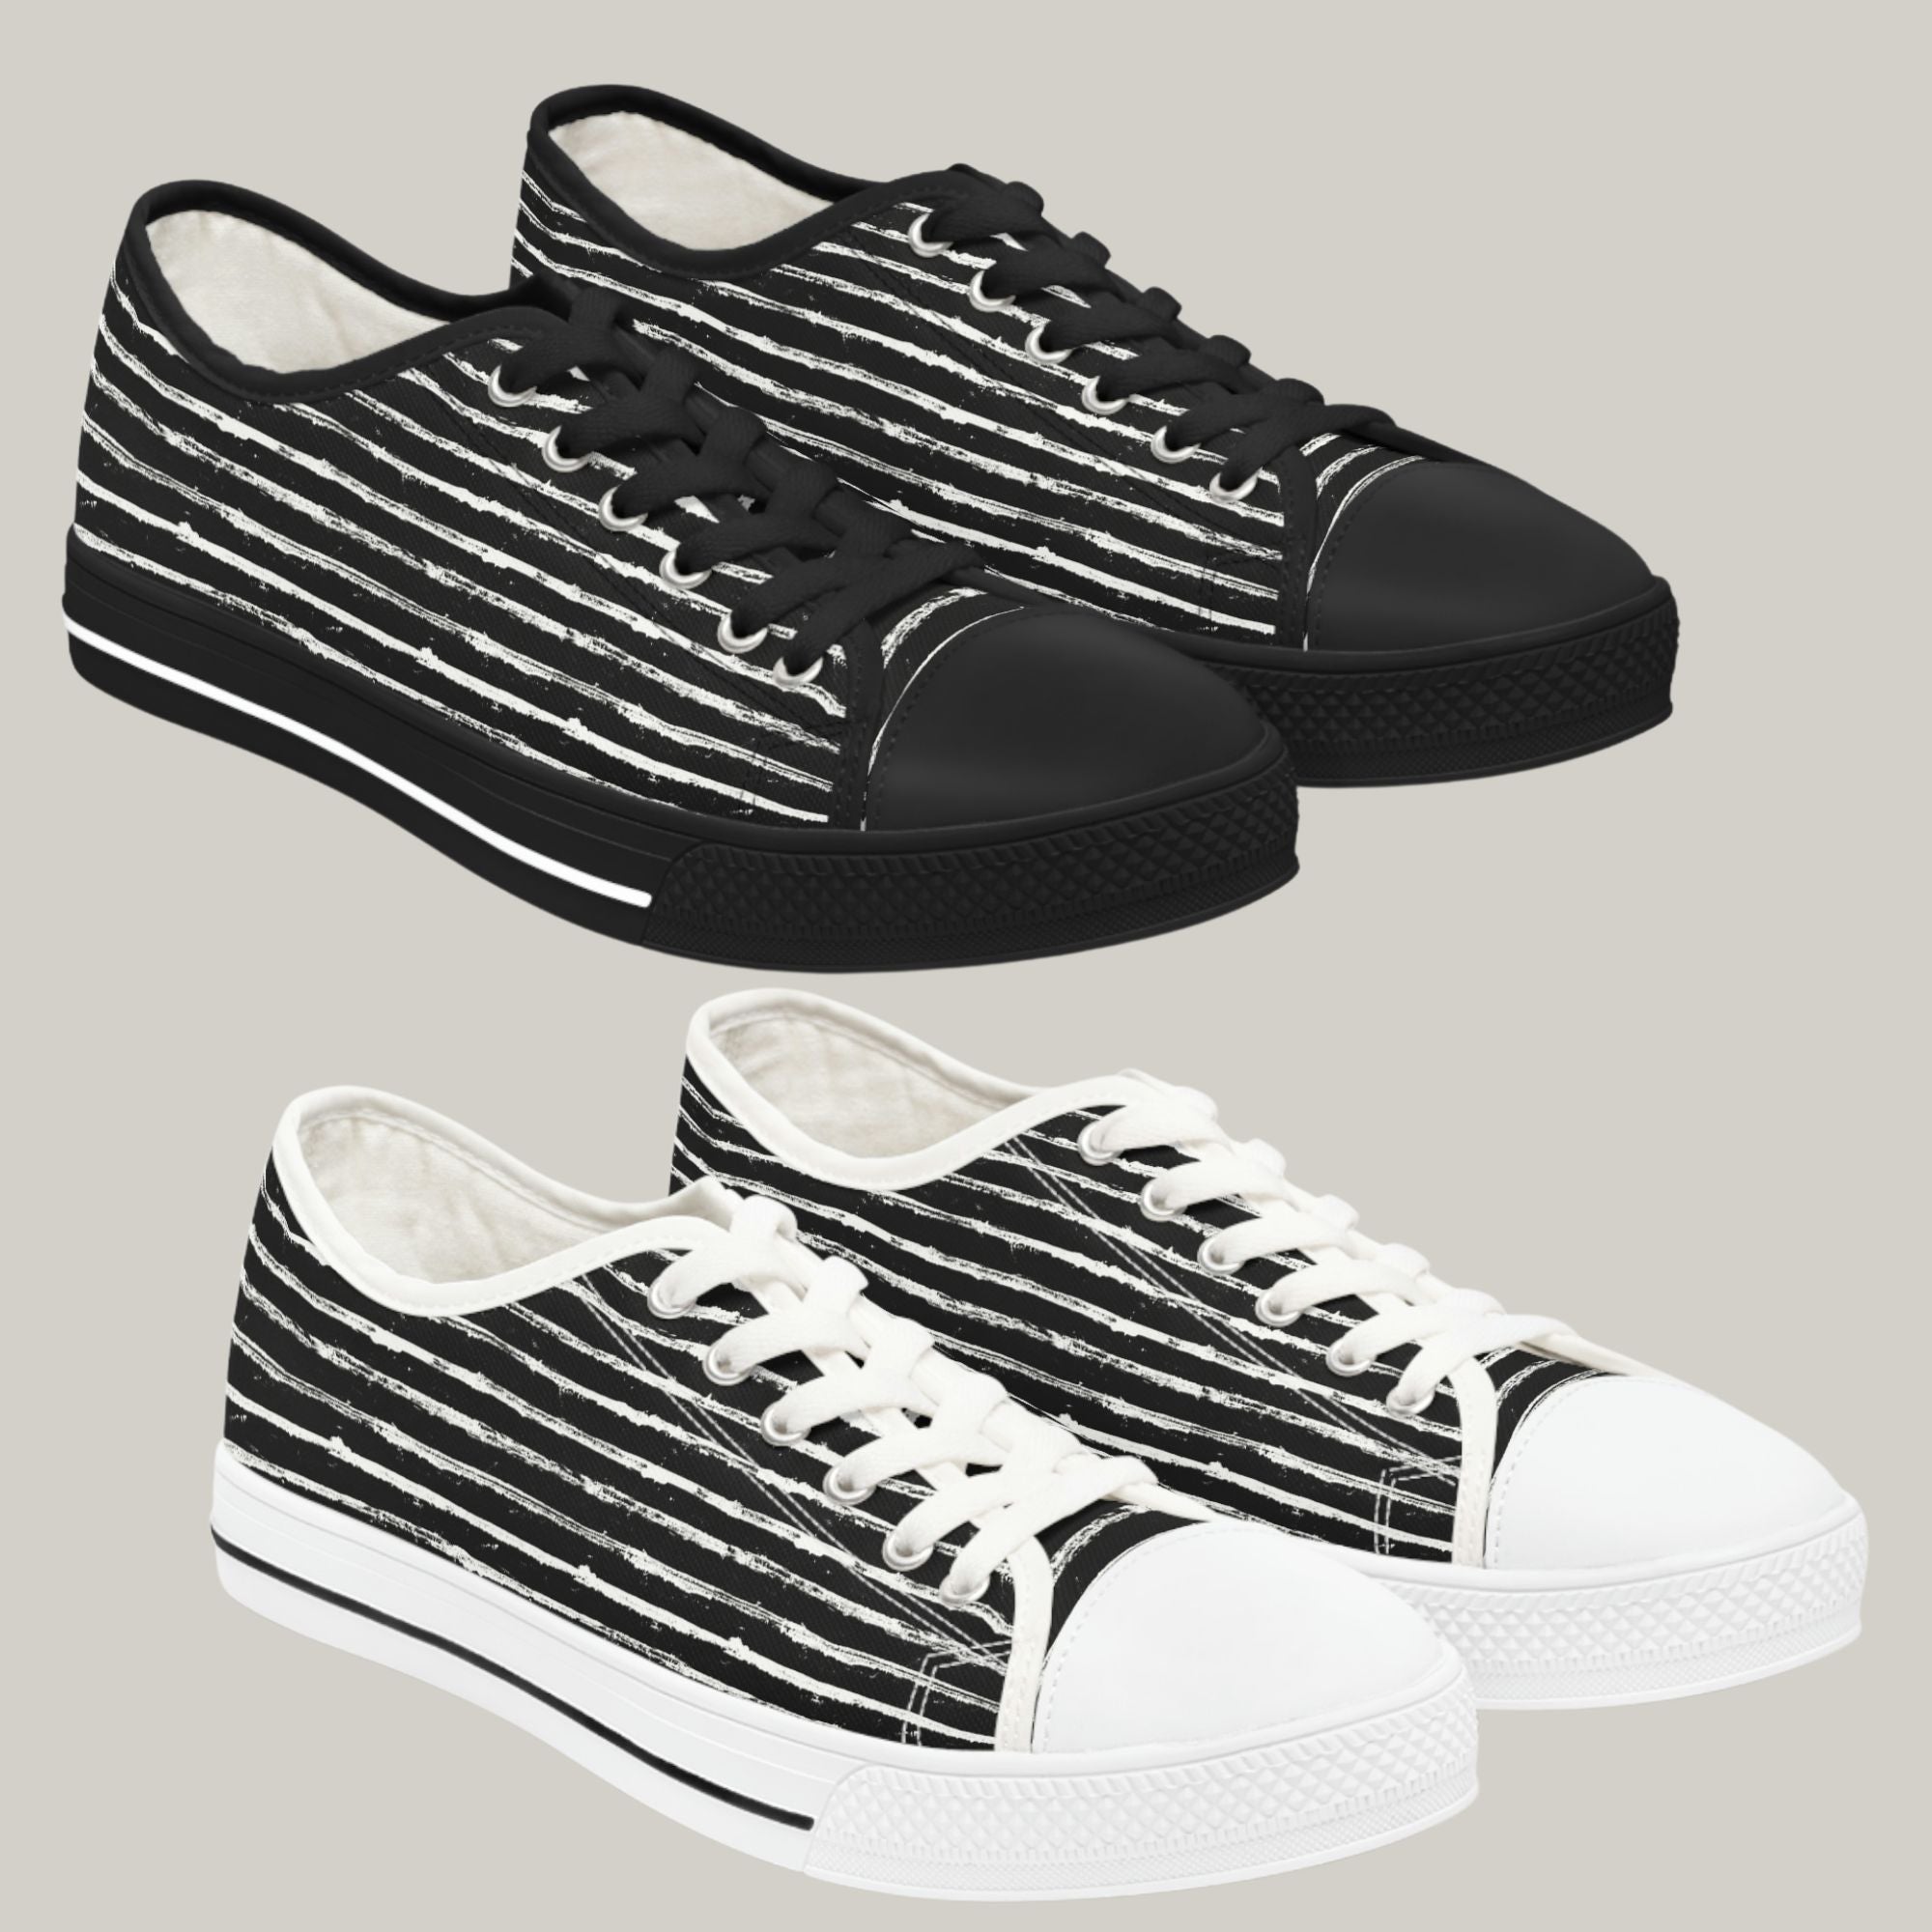 SCRATCHED STRIPE - Women's Low Top Sneakers Black and White Soles